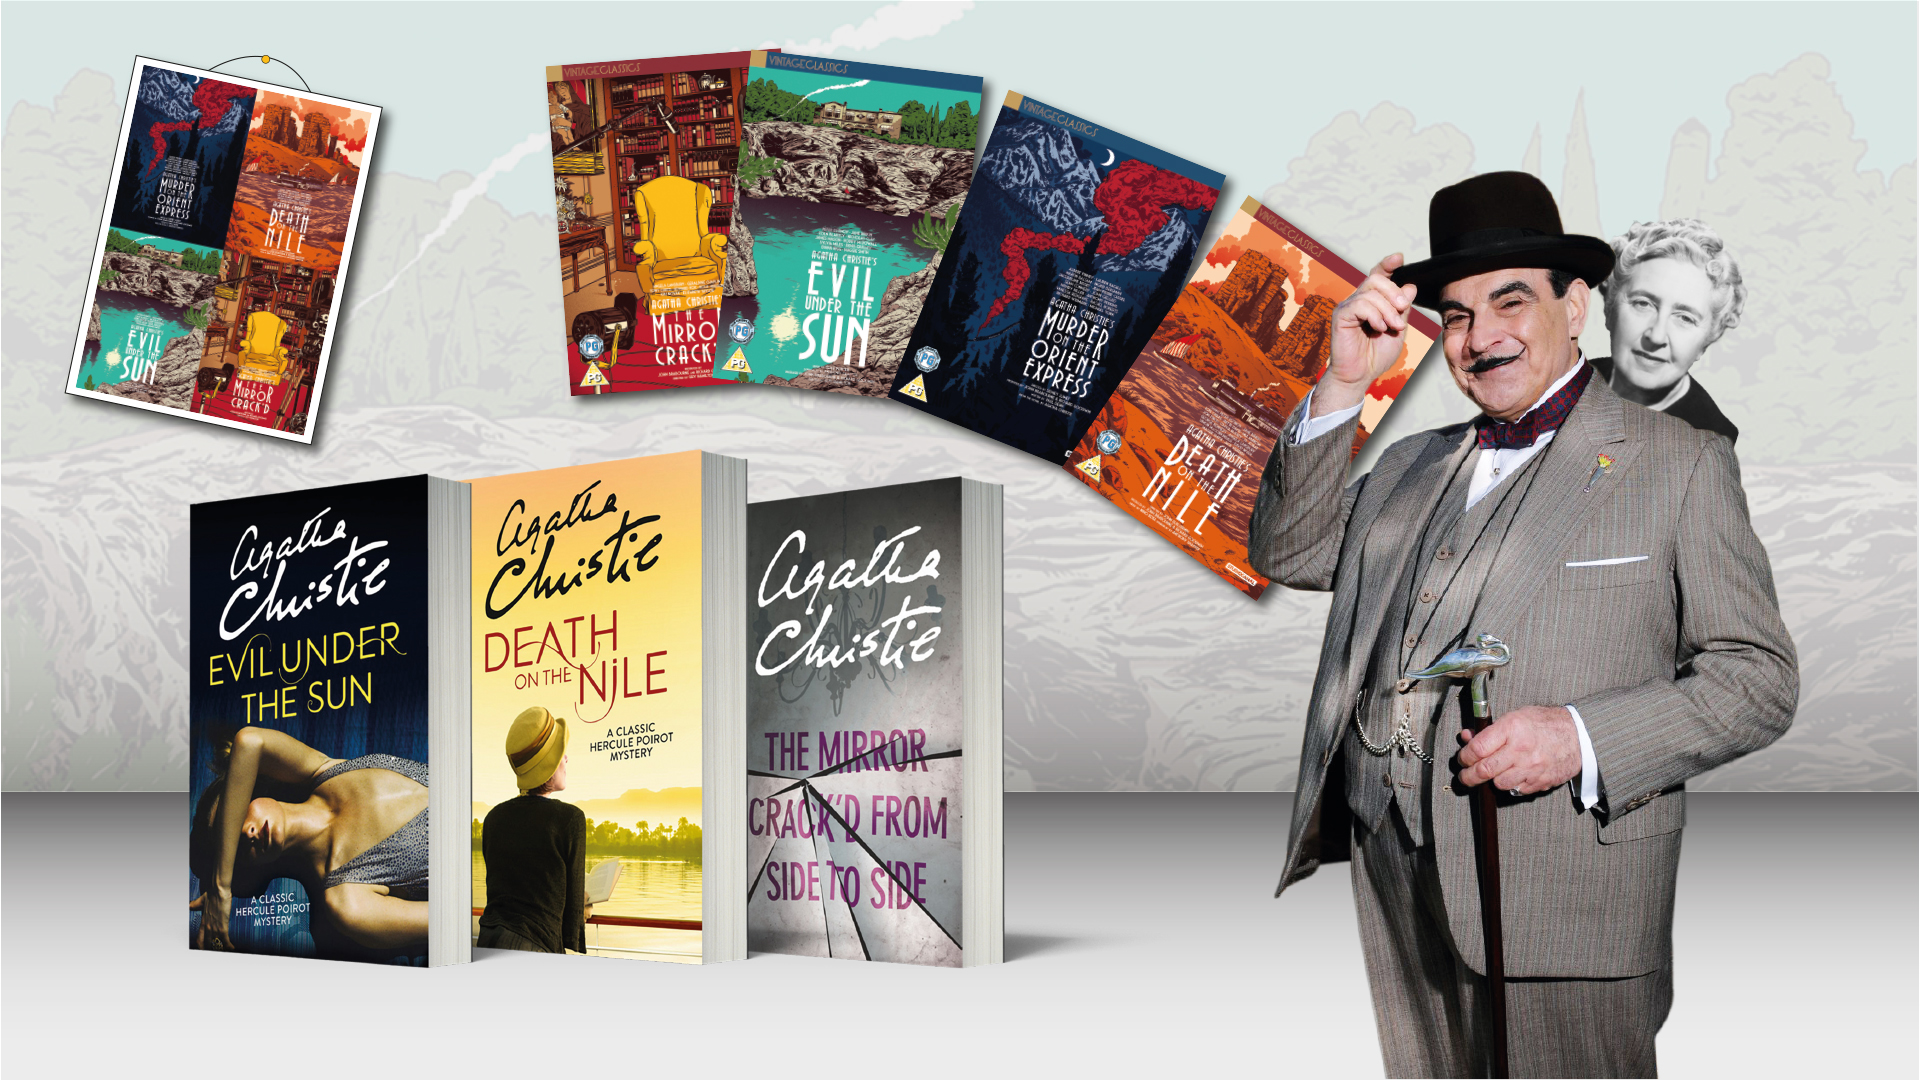 Agatha Christie books, DVDs, posters